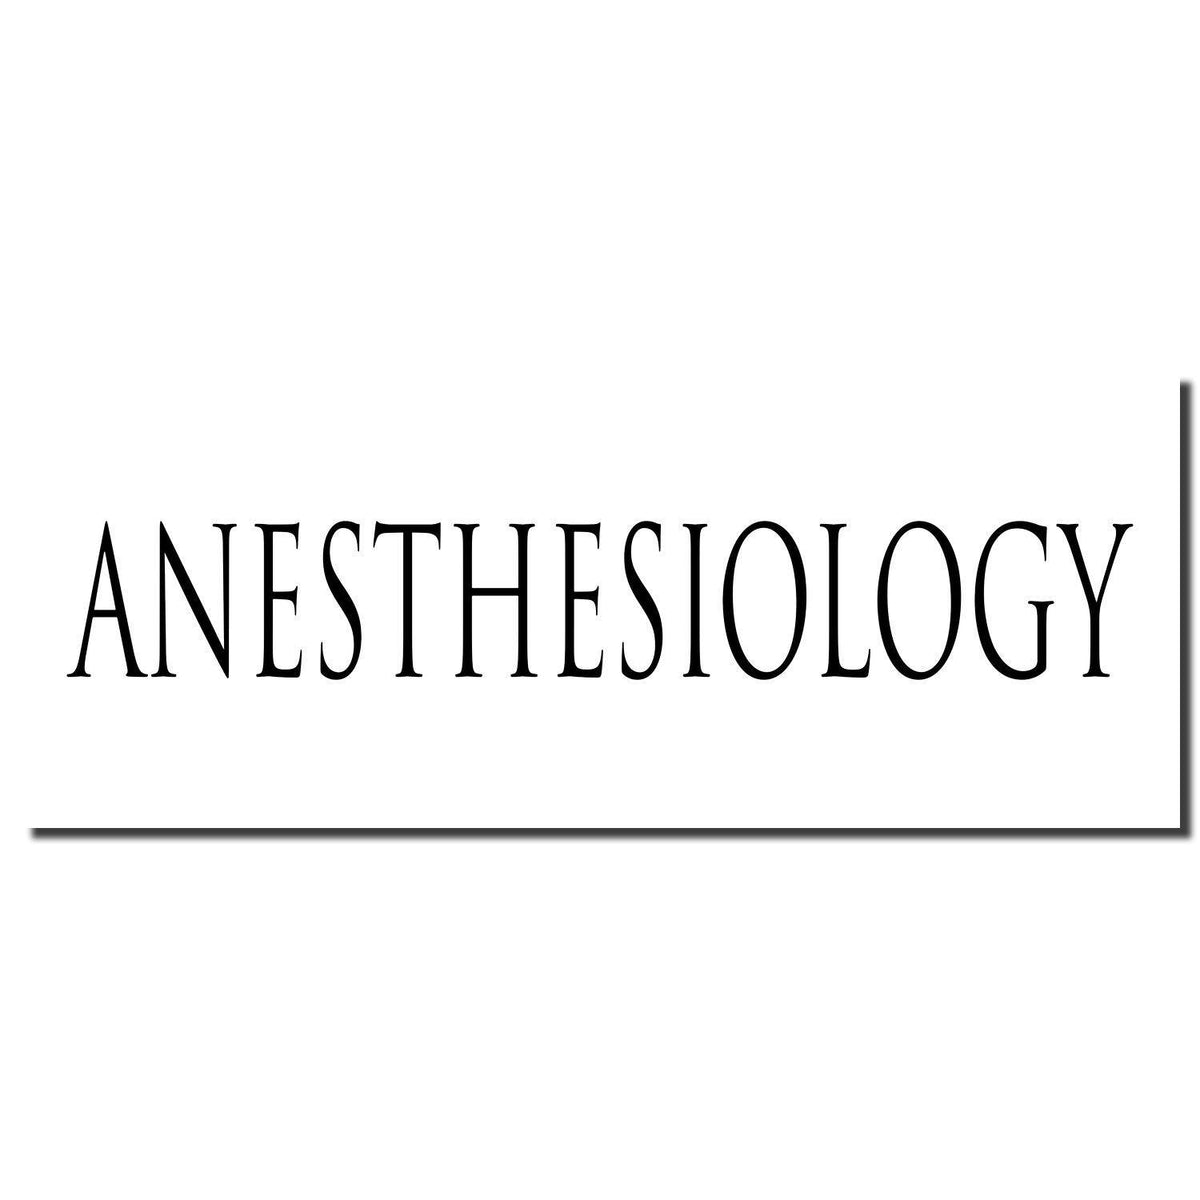 Enlarged Imprint Large Anesthesiology Rubber Stamp Sample